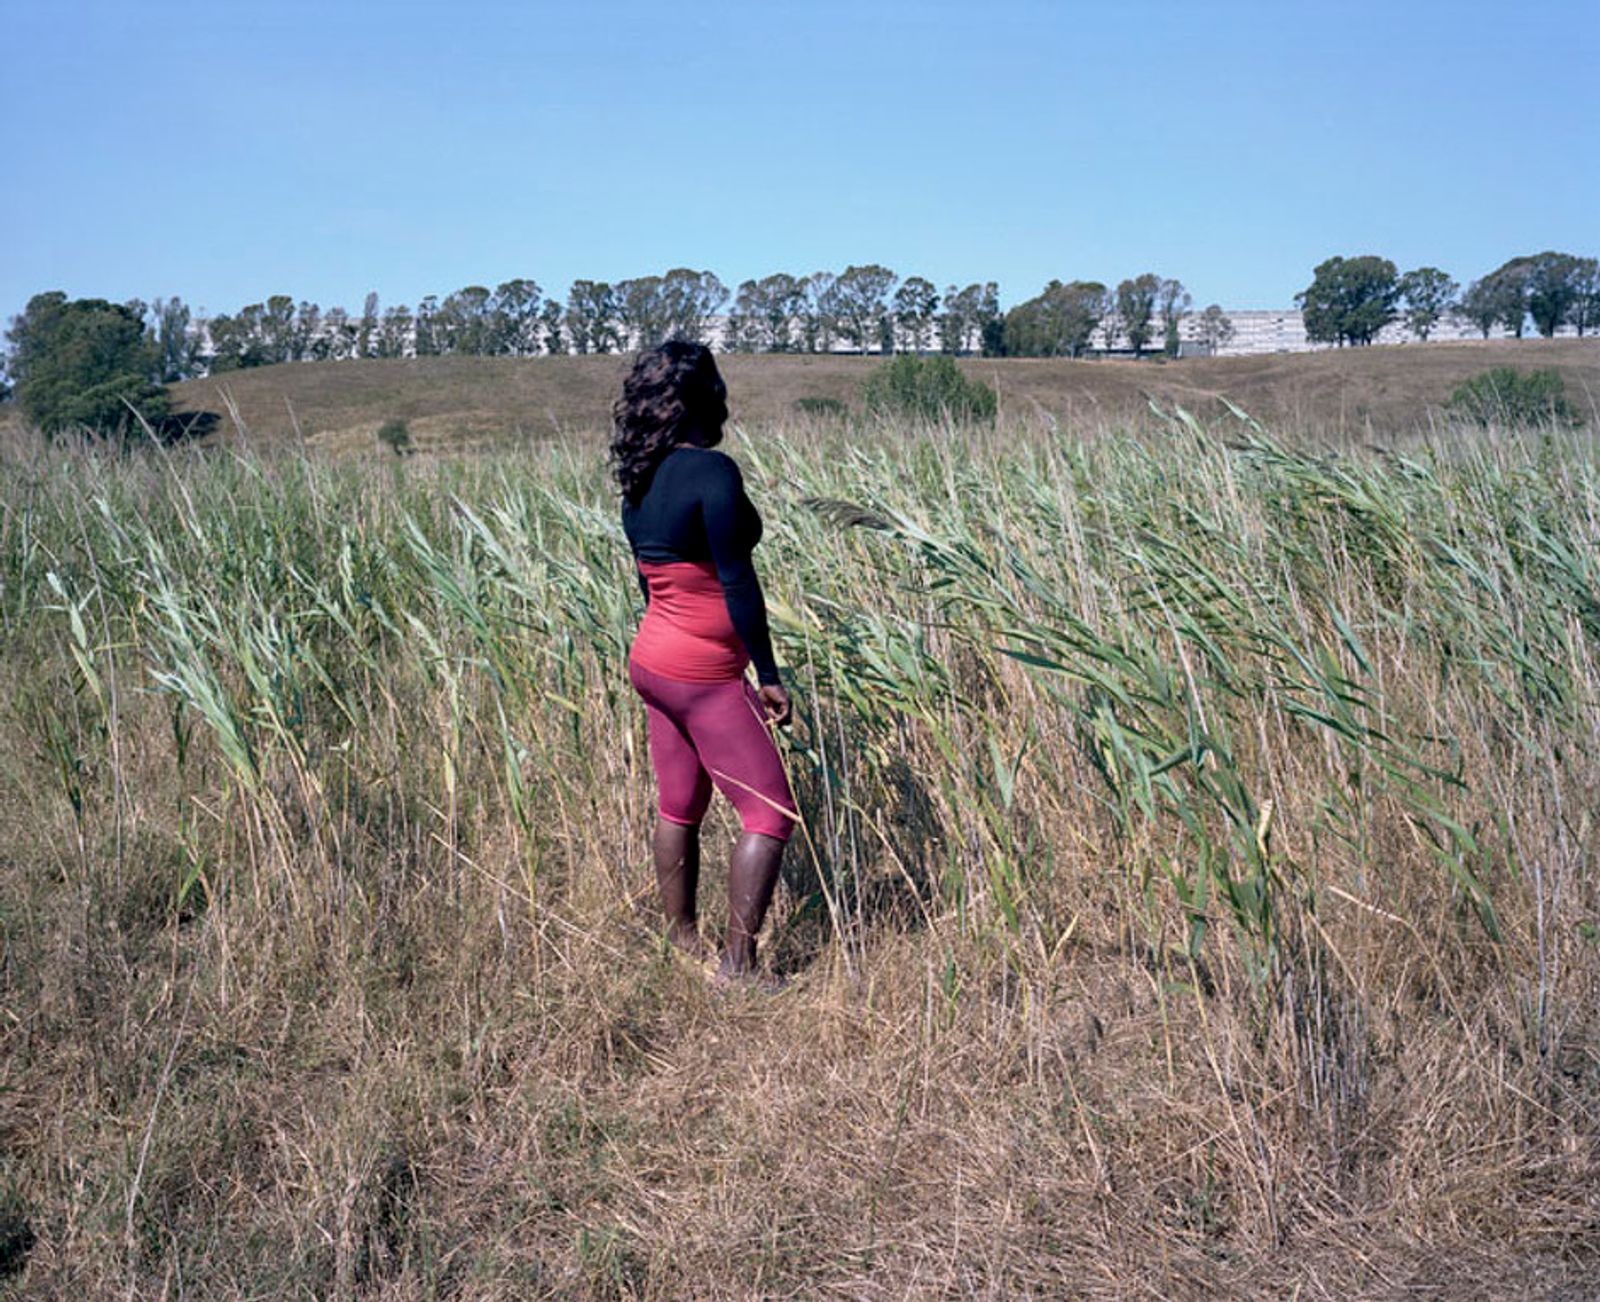 © Paolo Patrizi - Francesca, a sex worker in a field adjacent a country road